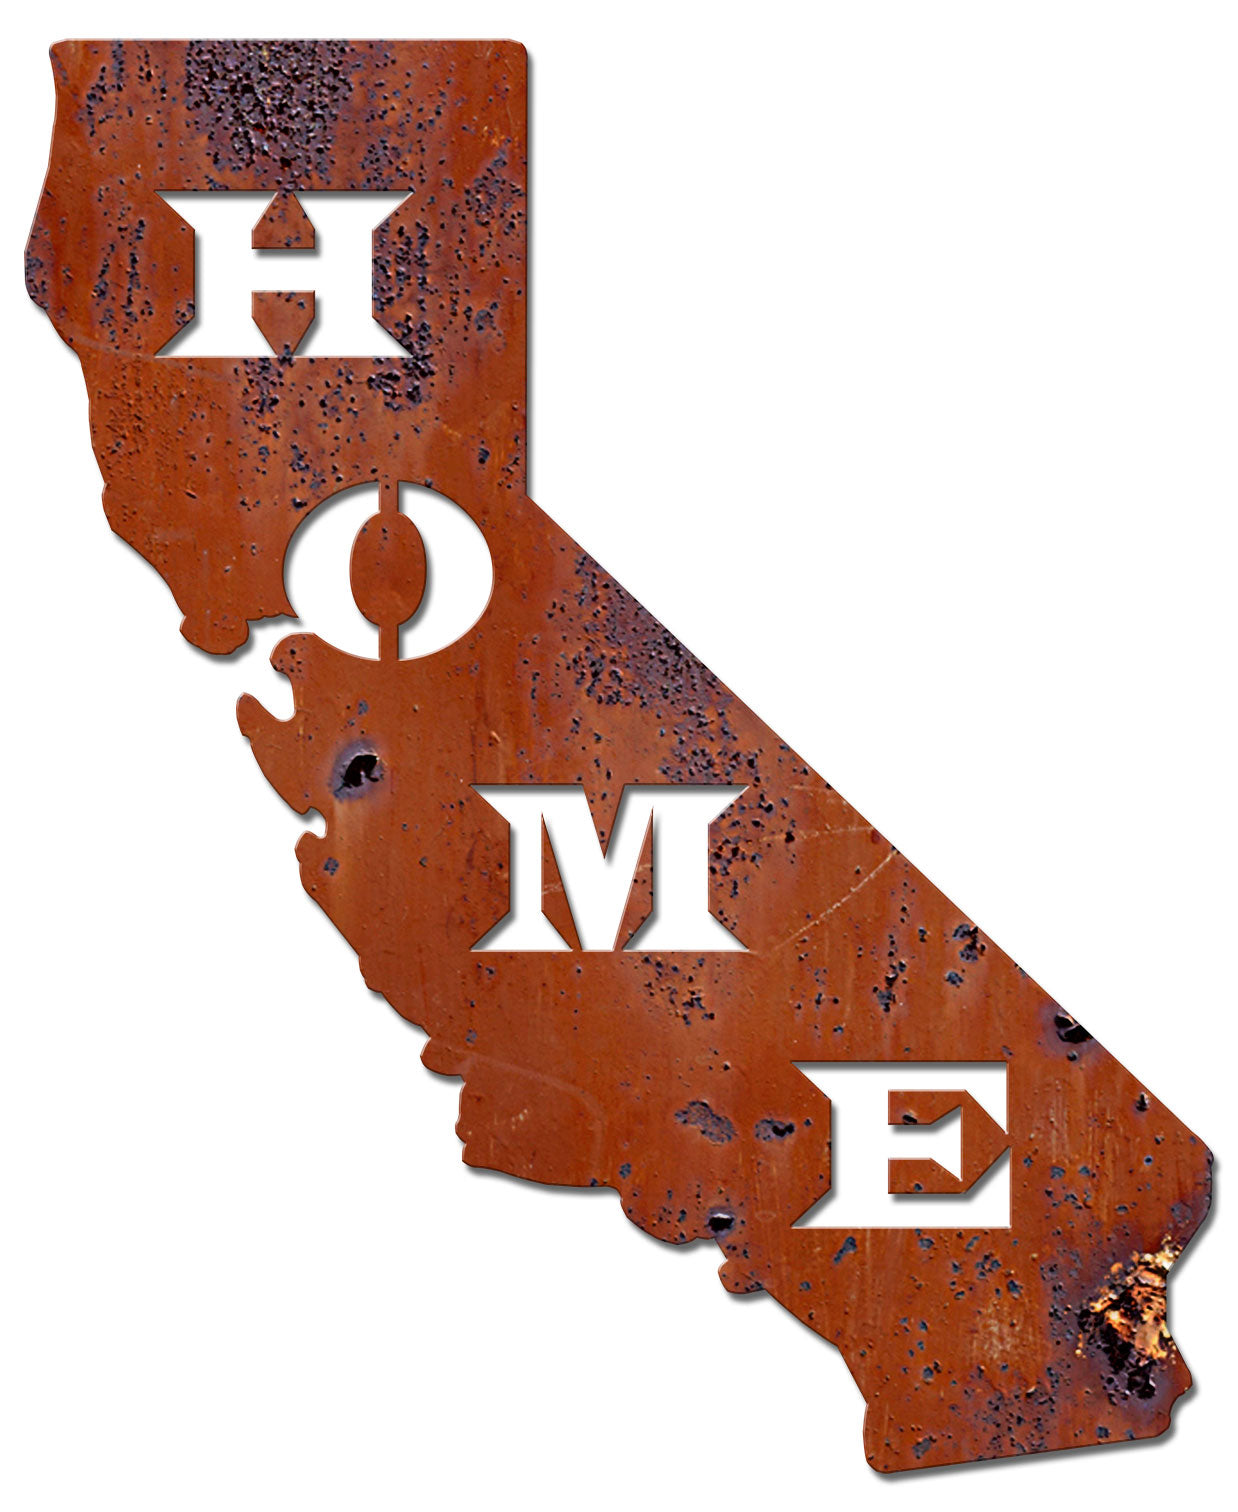 Home California Rust Vintage Sign